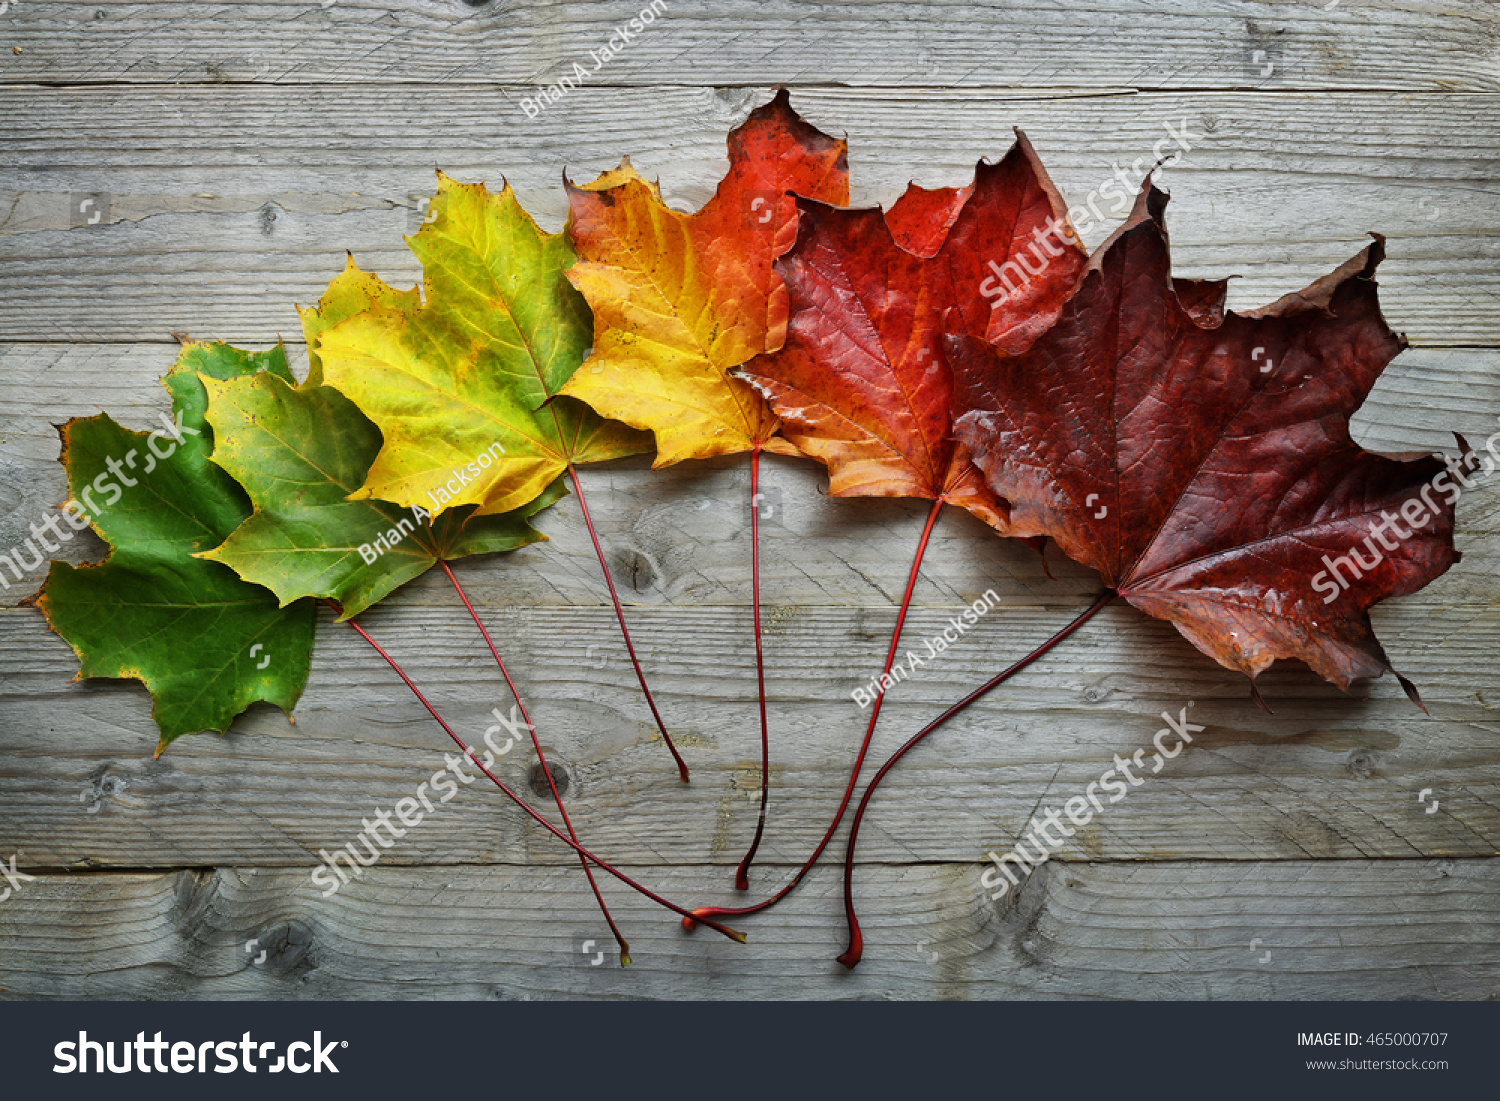 Autumn Maple leaf transition and variation concept for fall and change of season #465000707